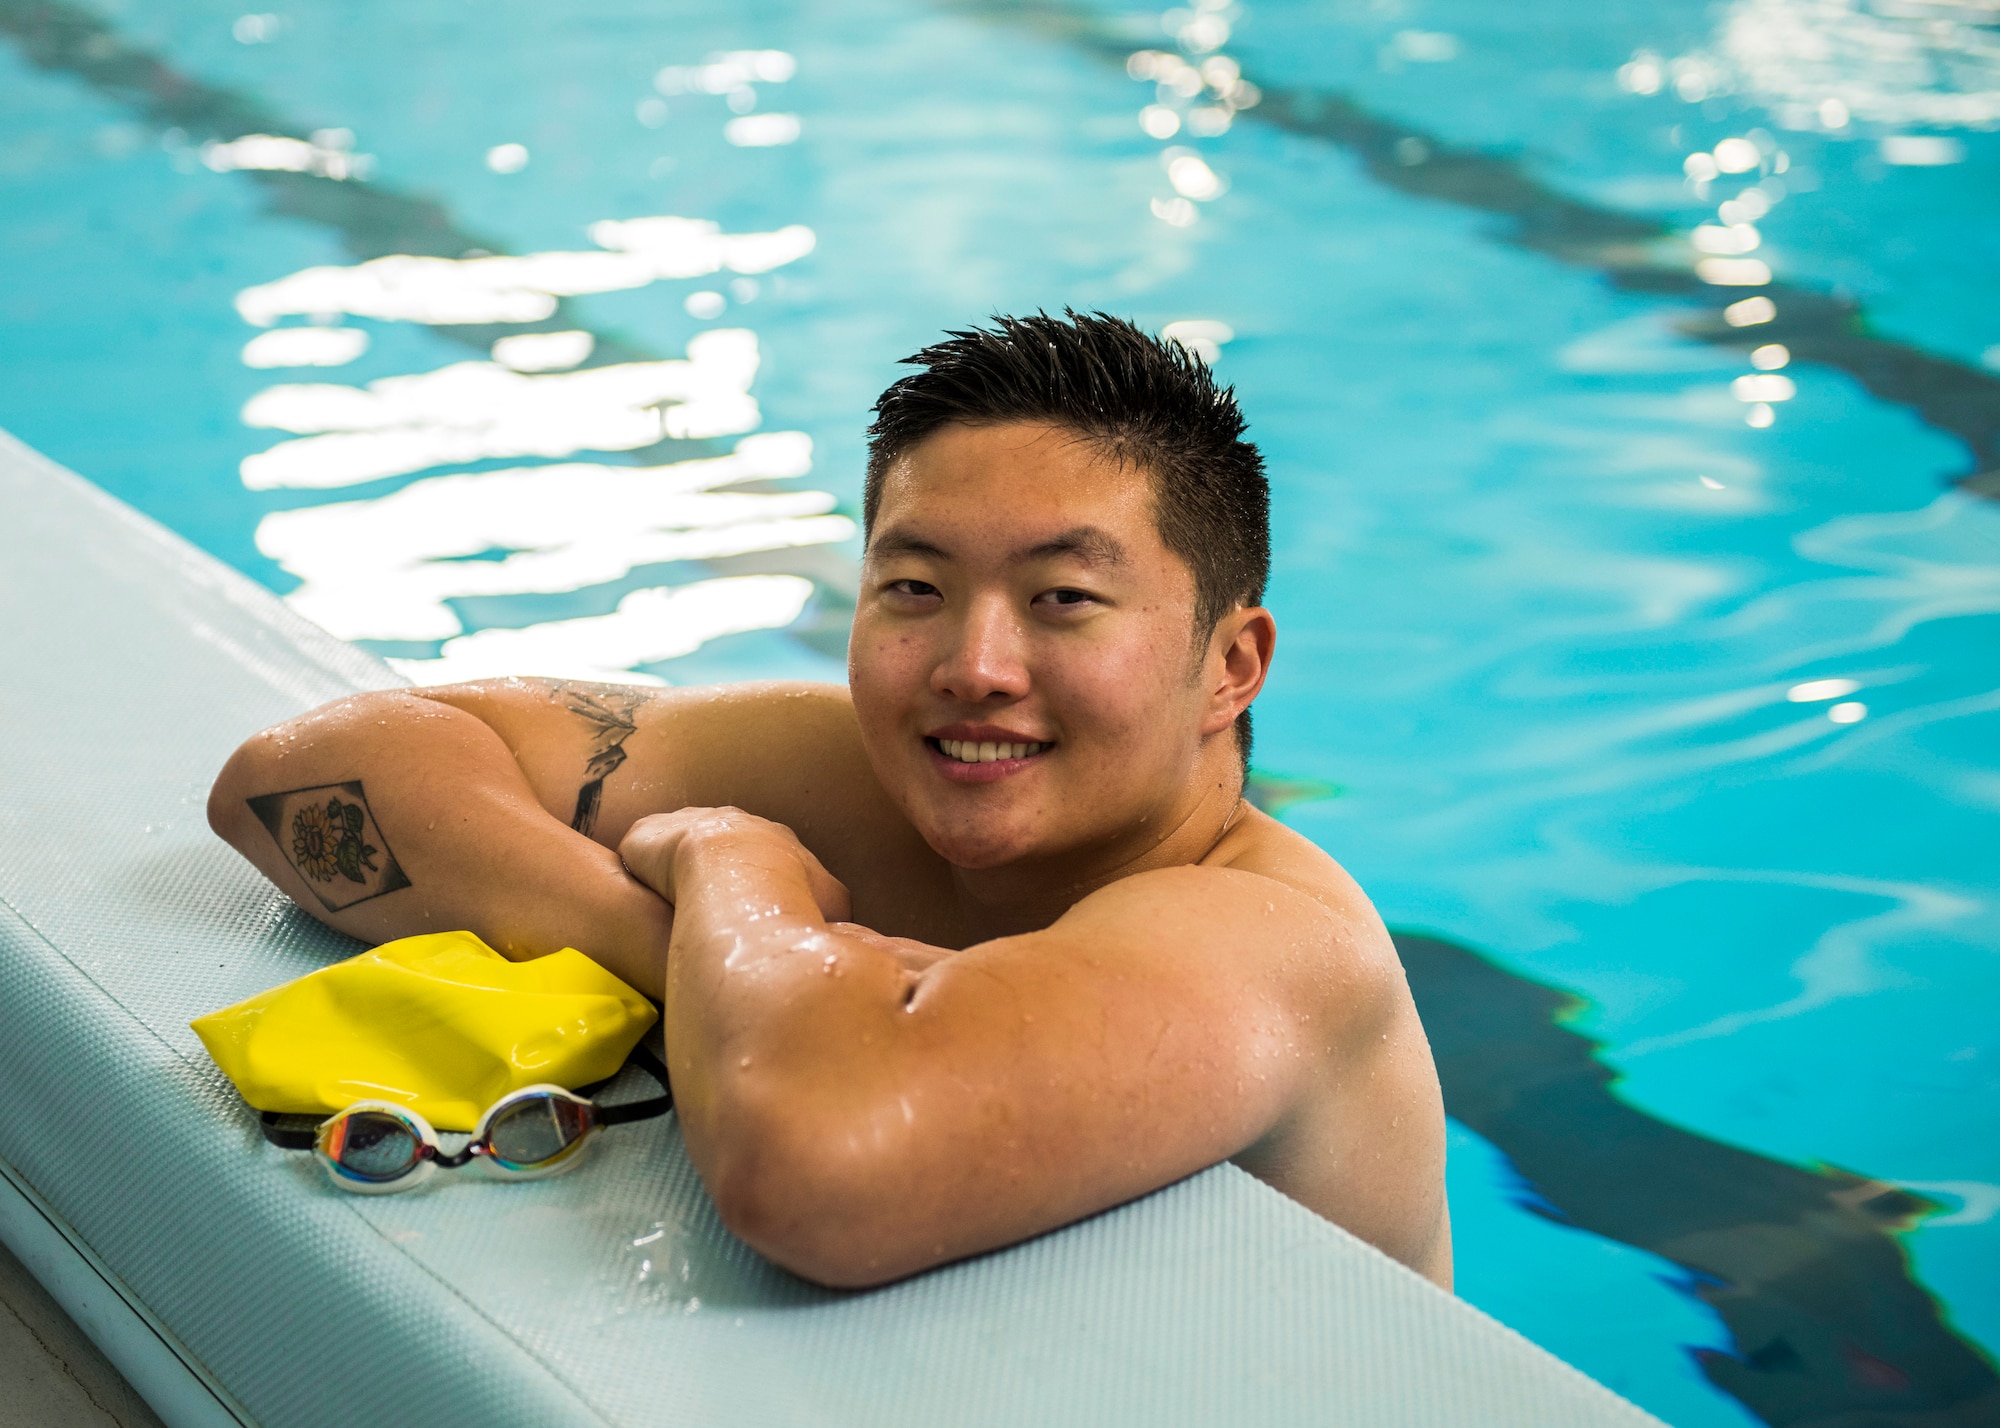 Airman 1st Class Micheal Yoo, 366th Maintenance Squadron, avionics backshop techinician, poses for a photo during his daily swim training September 18th, 2019, at Mountain Home Air Force Base, Idaho. Yoo is a competitor on the Air Force team in the world military games. (U.S. Air Force photo by Senior Airman Tyrell Hall)